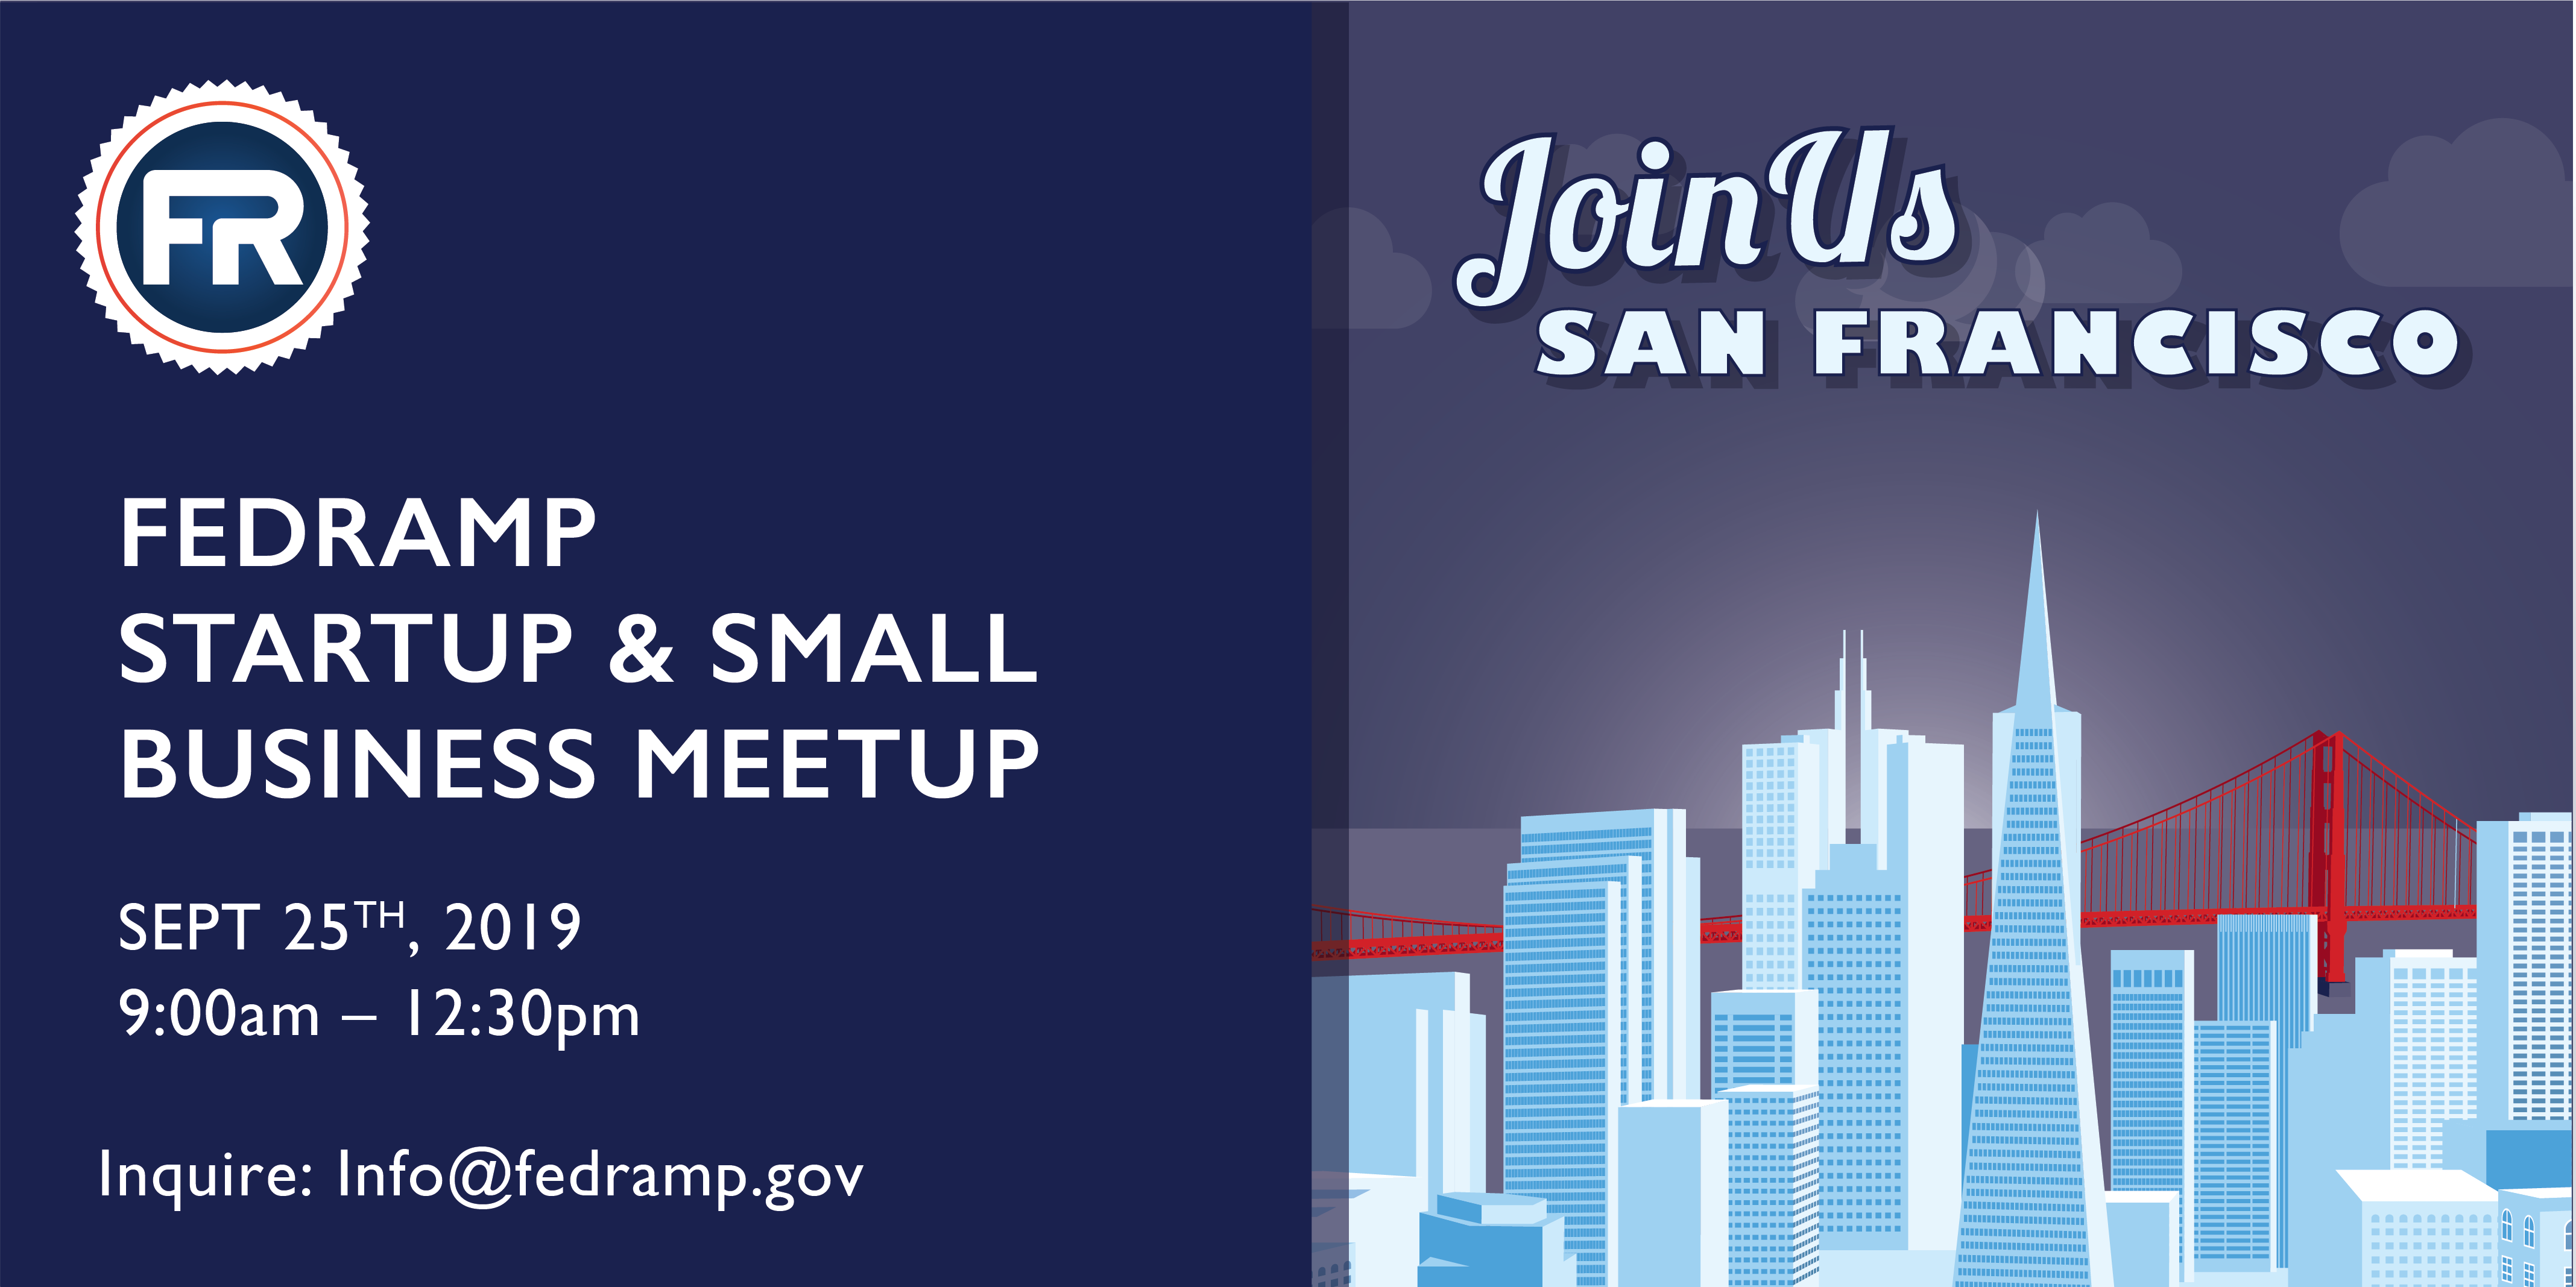 FedRAMP Heads to San Francisco to Host Small Business & Startup Meetup